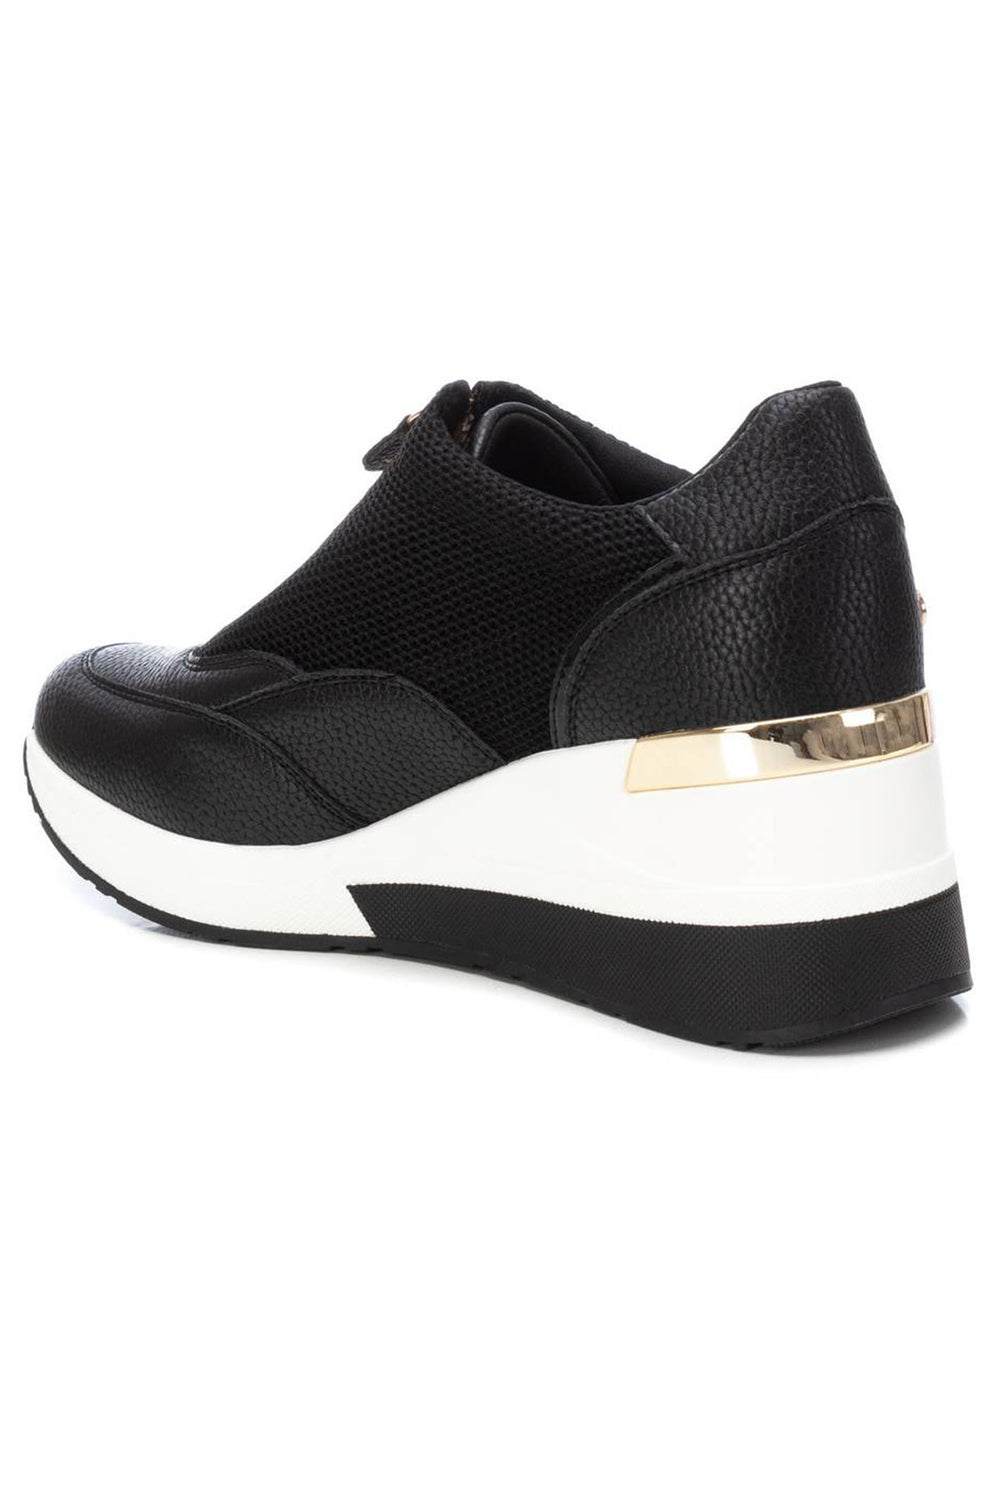 XTI 14264802 Black Sports Luxe Wedge Trainers - Experience Boutique